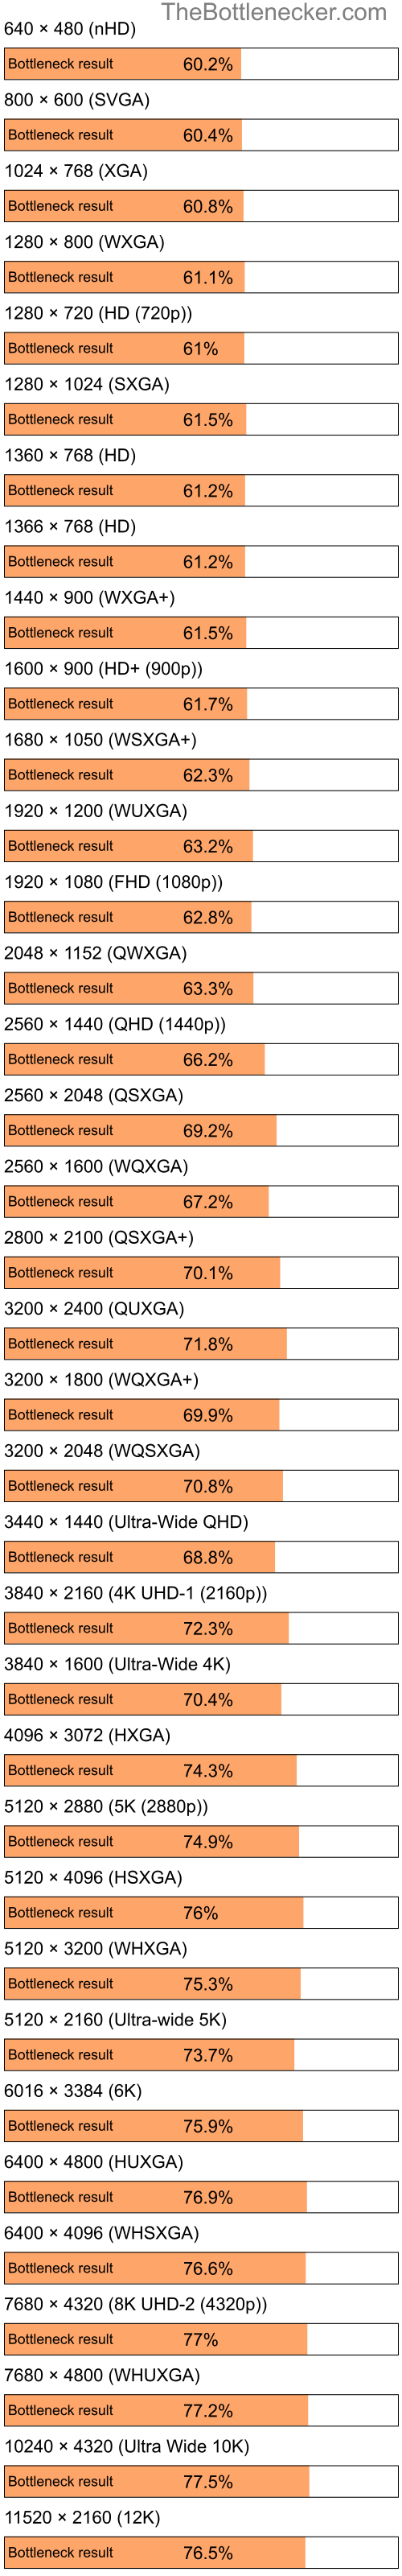 Bottleneck results by resolution for Intel Atom N280 and AMD Radeon X700 PRO in Processor Intense Tasks